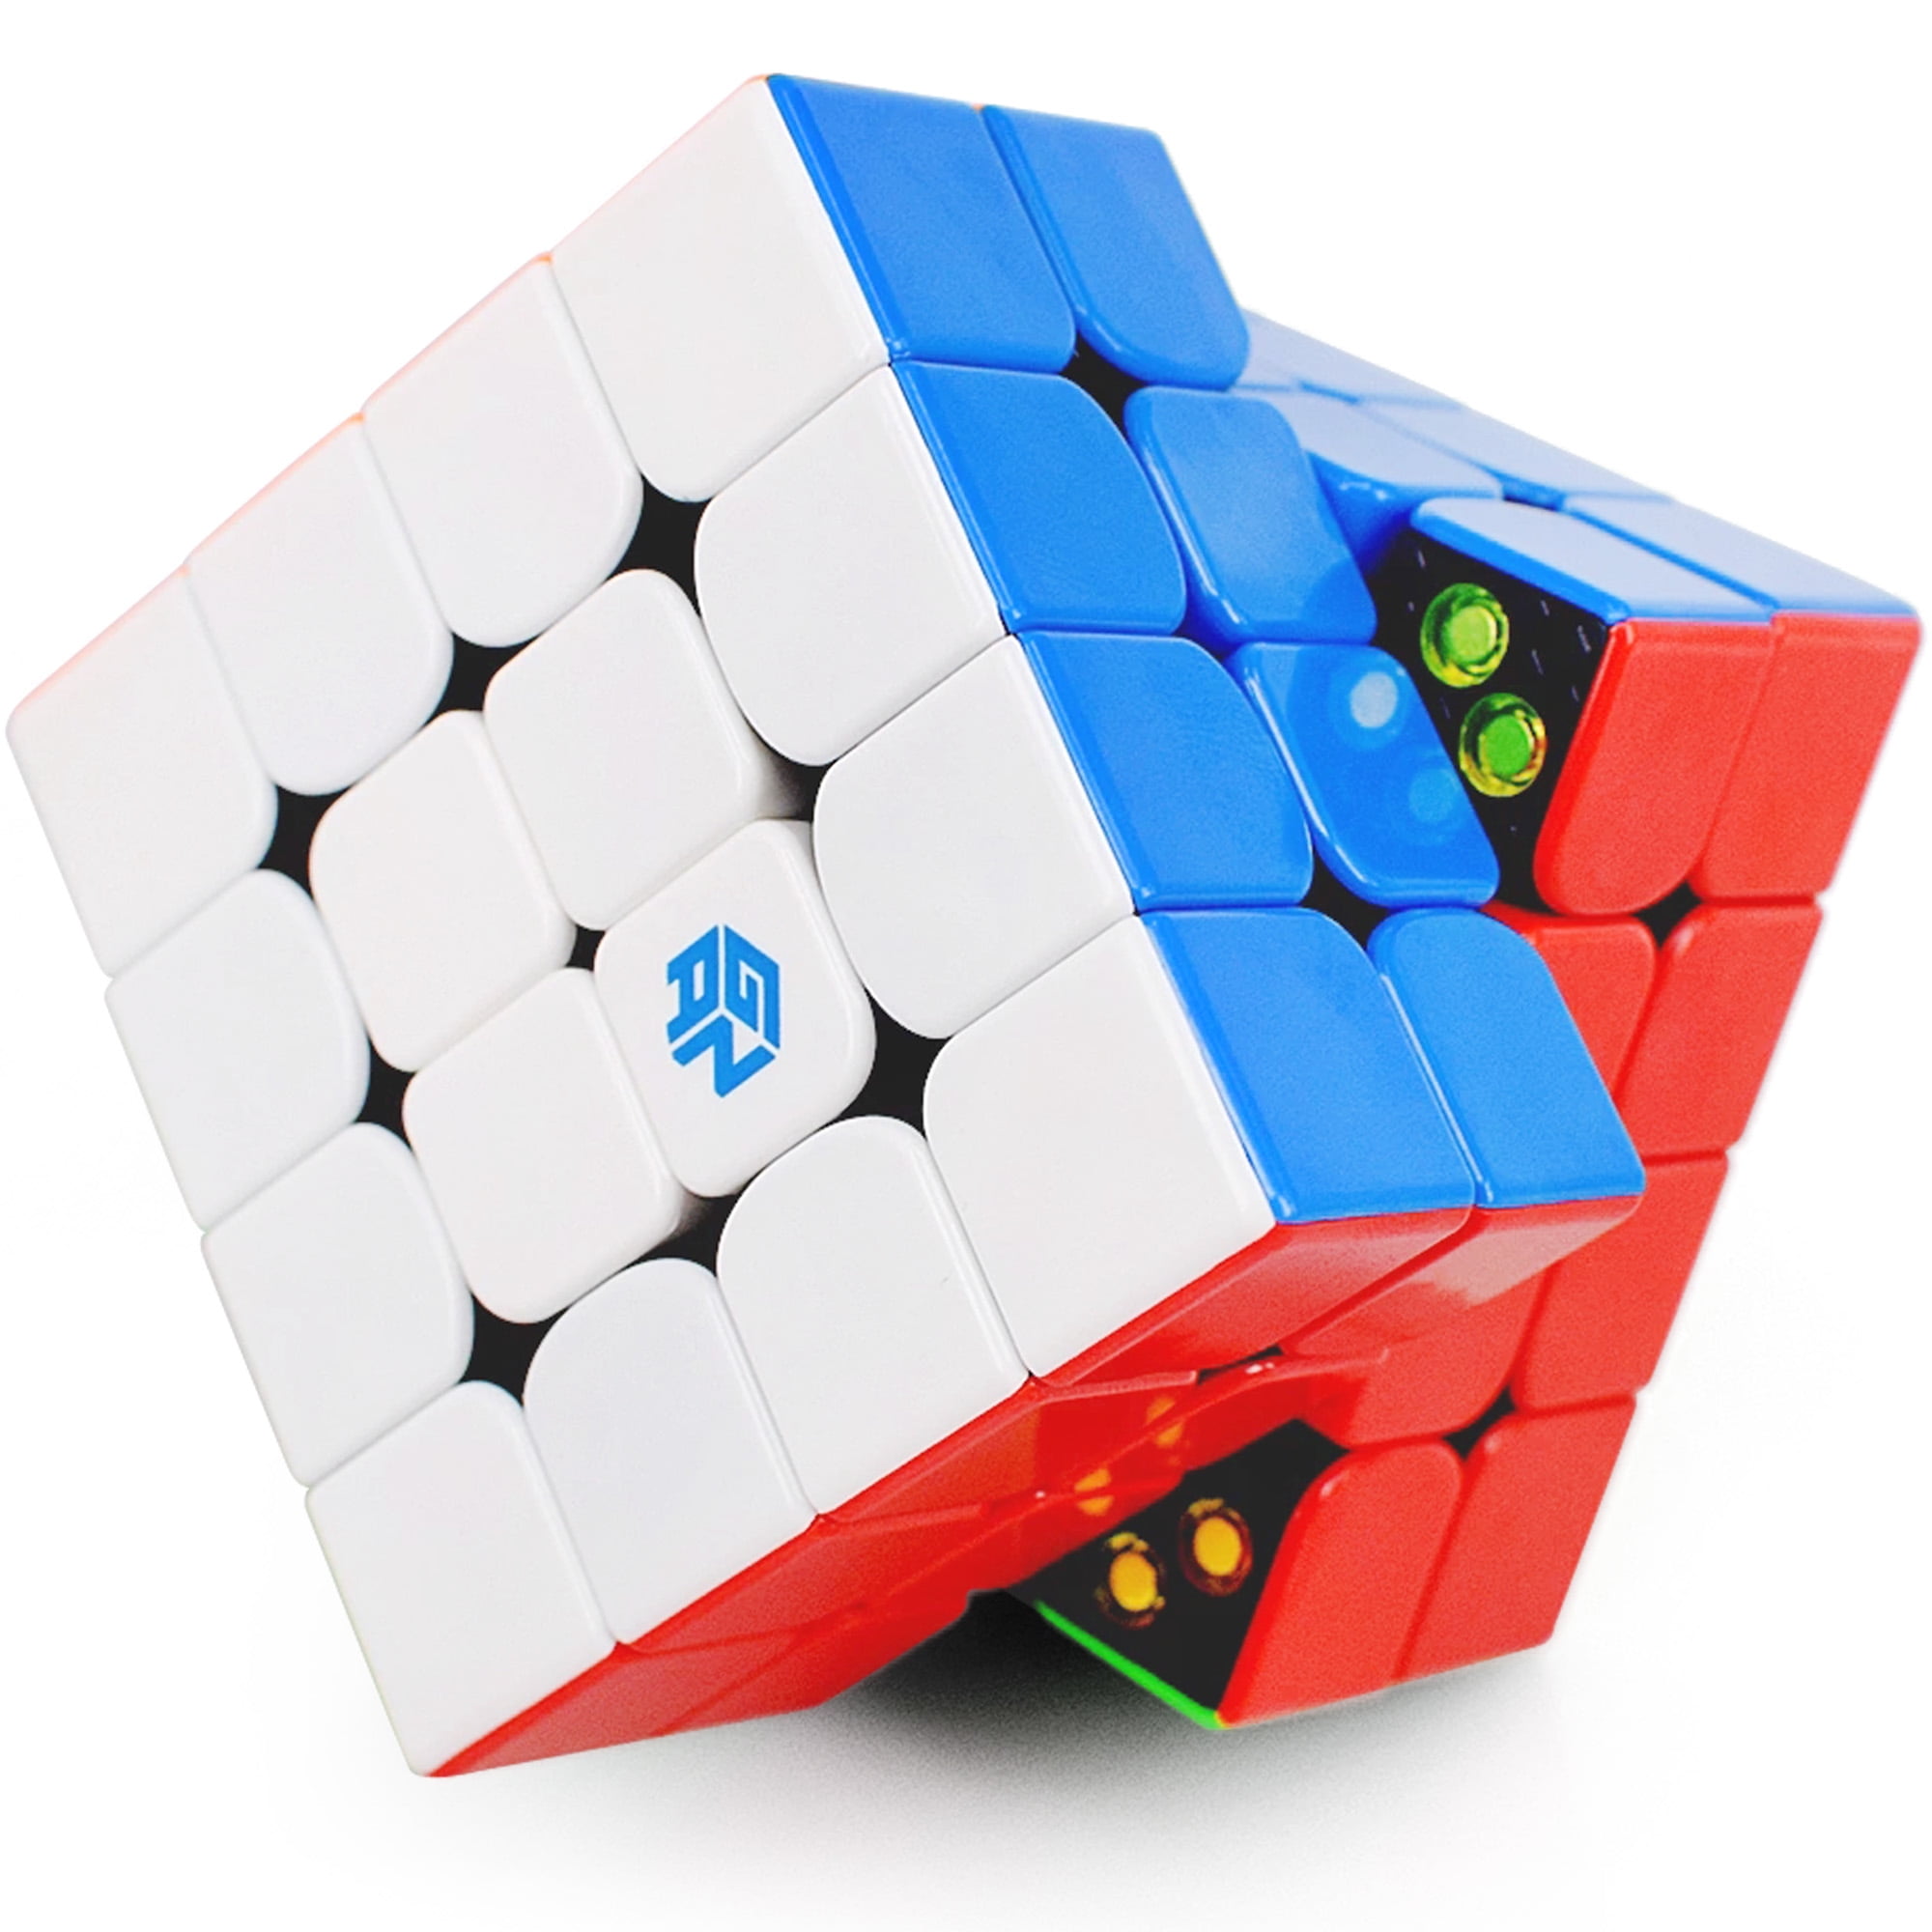 Gan m, 4x4 Magnetic Speed by 4 Stickerless Puzzle Toy Walmart.com